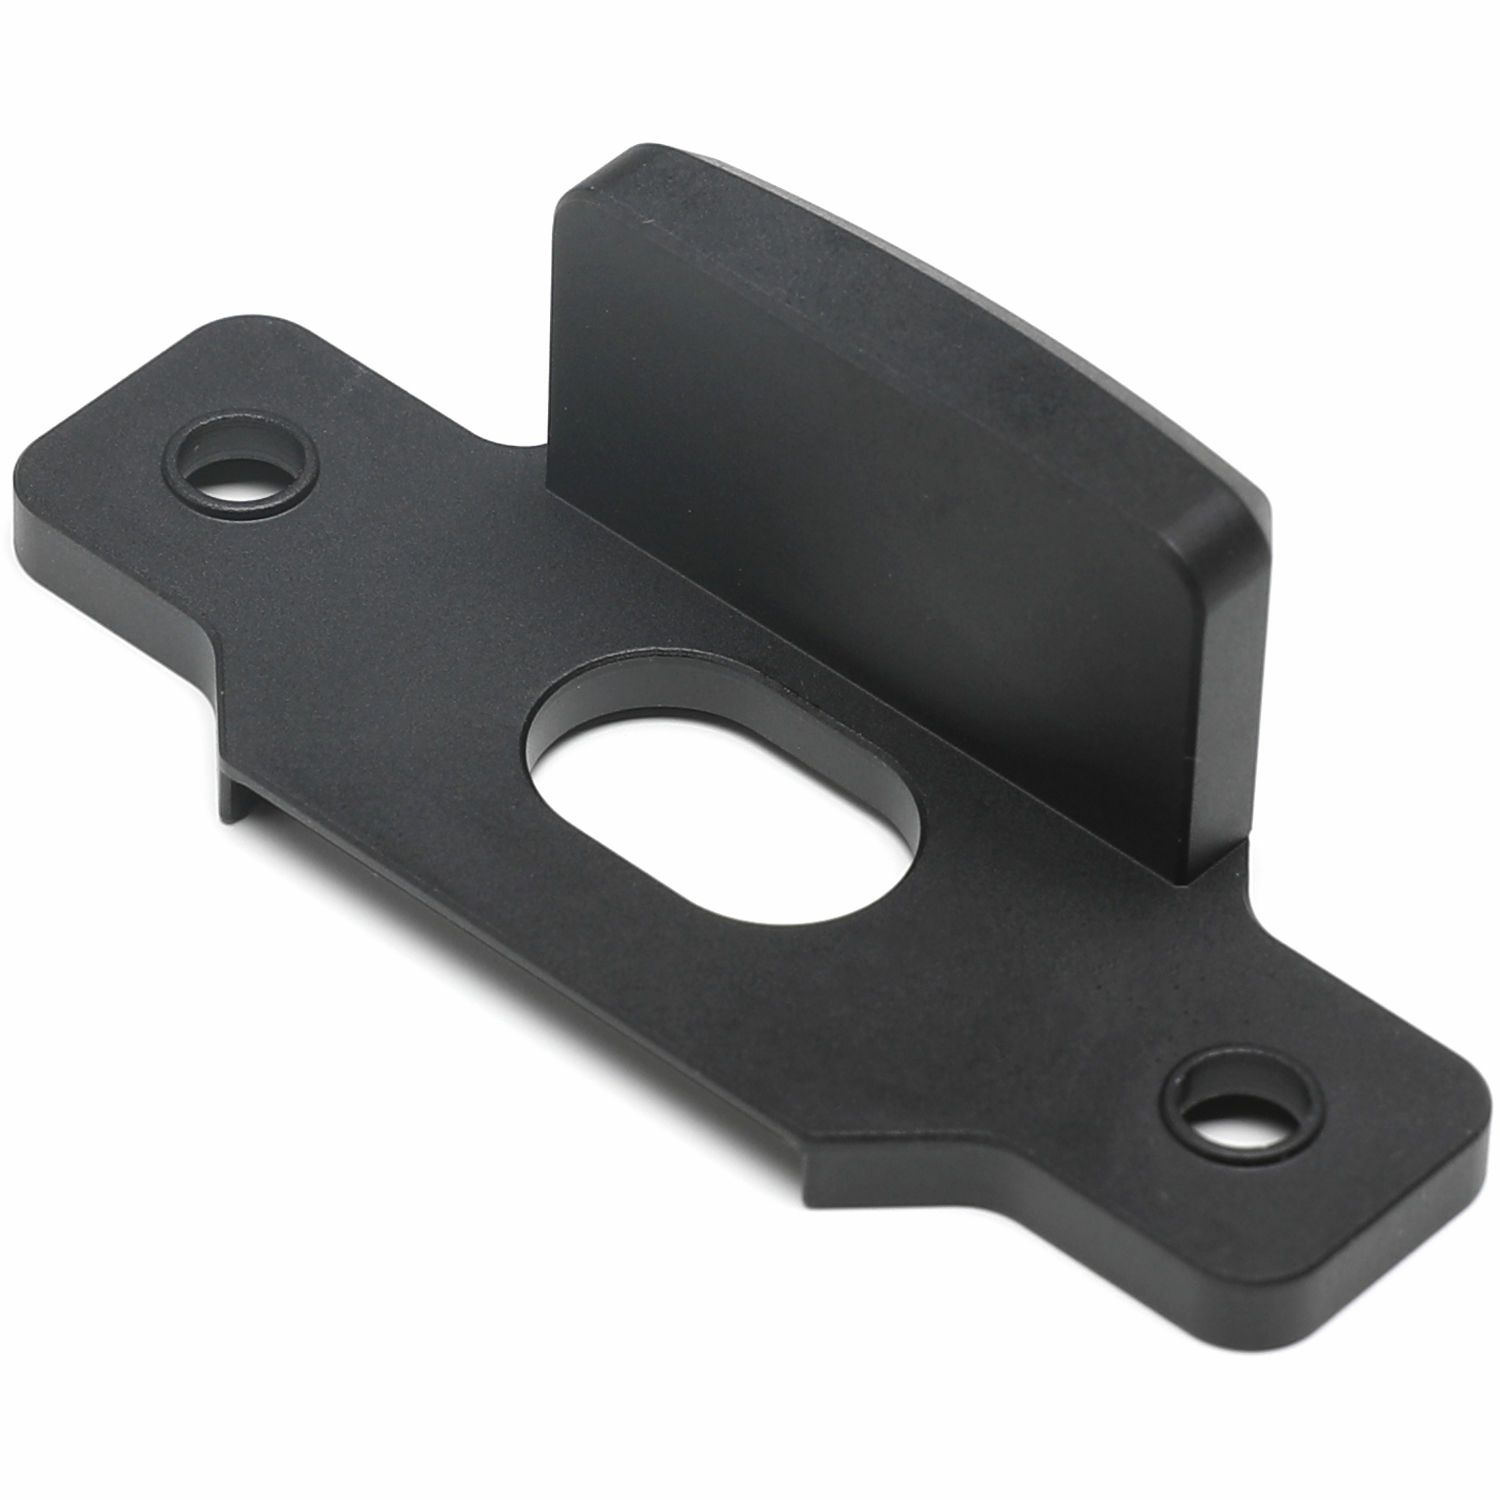 DJI CrystalSky Spare Part 5 Mavic/Spark Remote Controller Mounting Bracket (CP.BX.00000005.01)